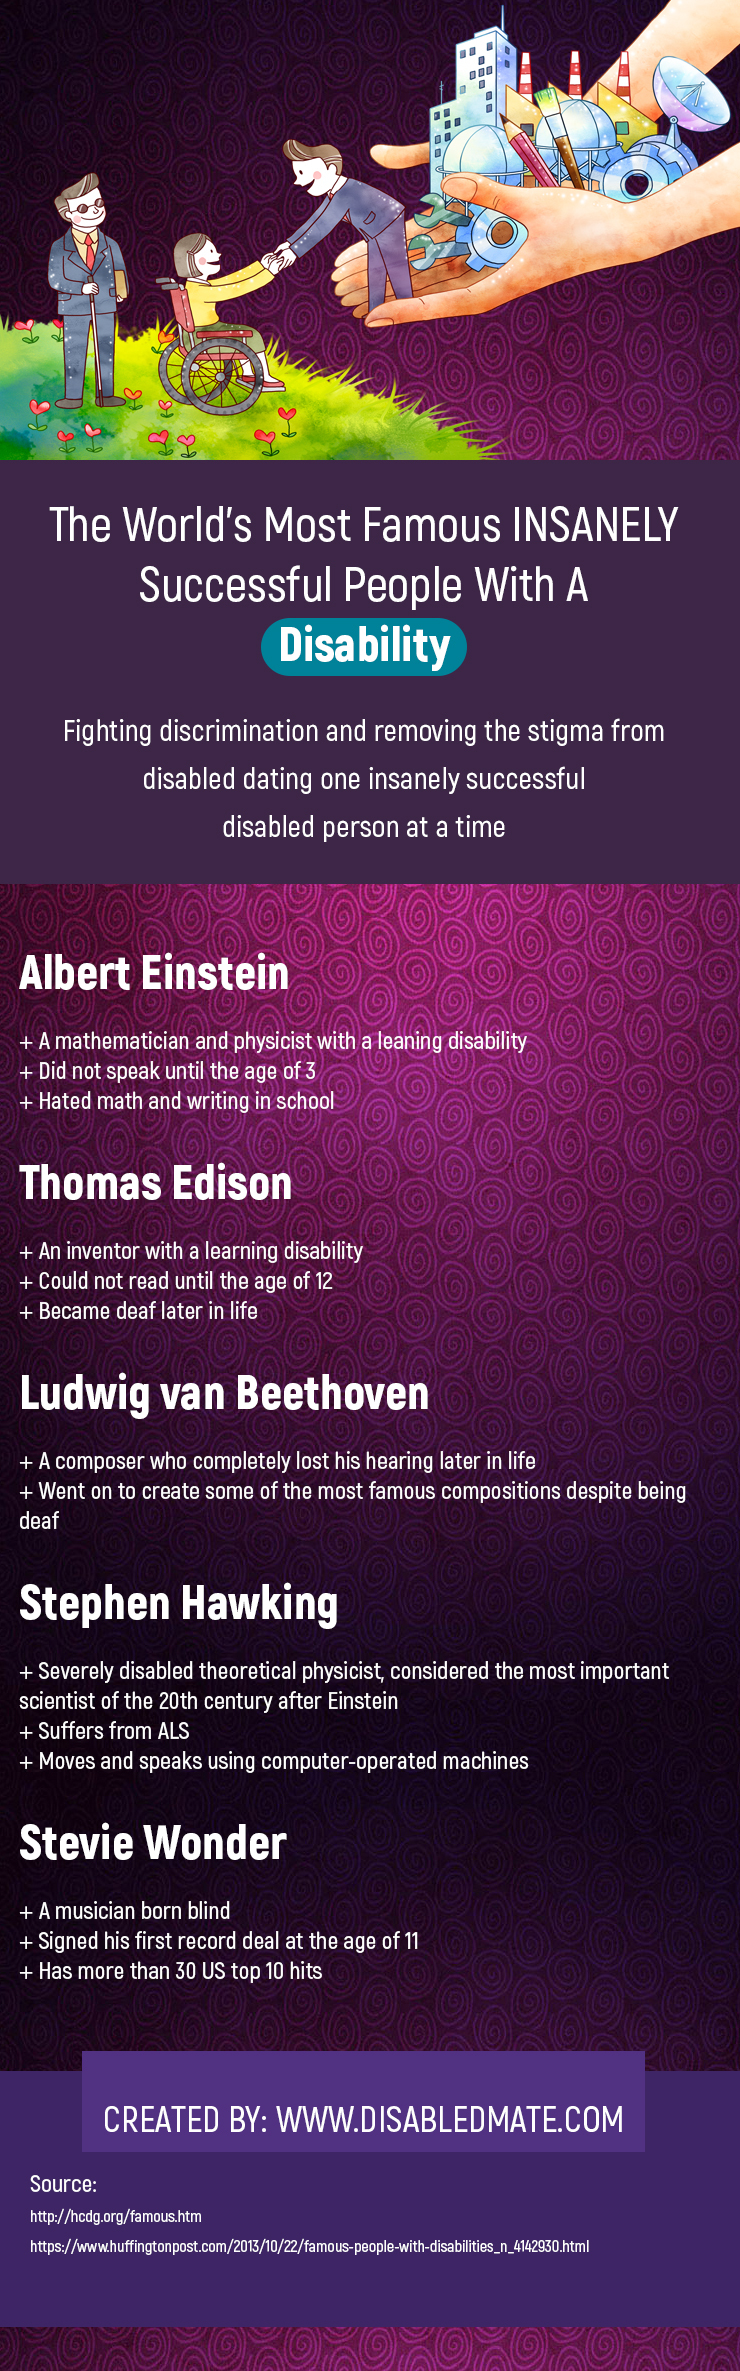 The World’s Most Famous INSANELY Successful People With A Disability 